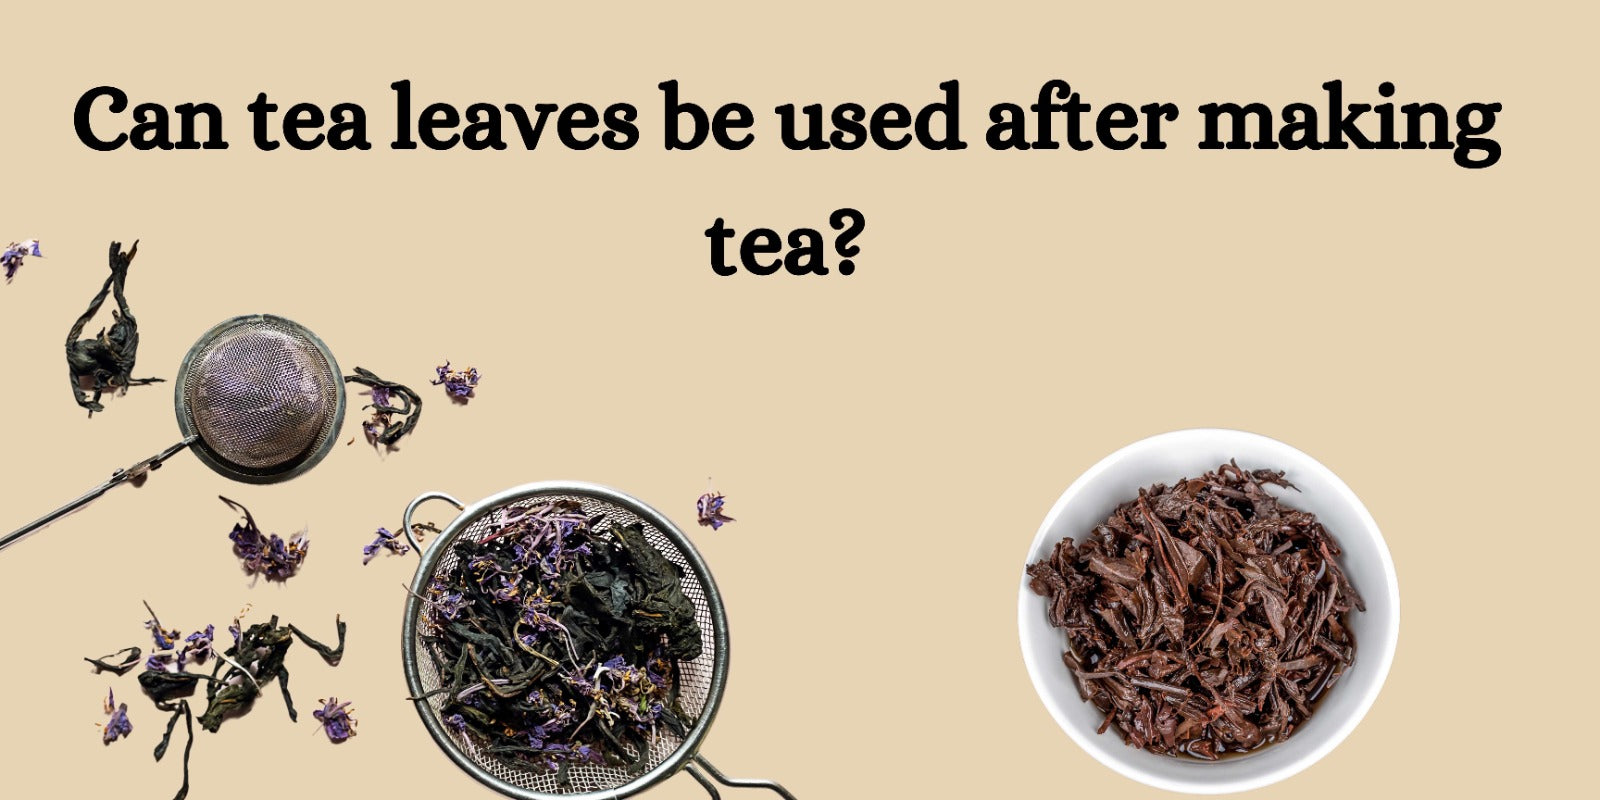 Can tea leaves be used after making tea?